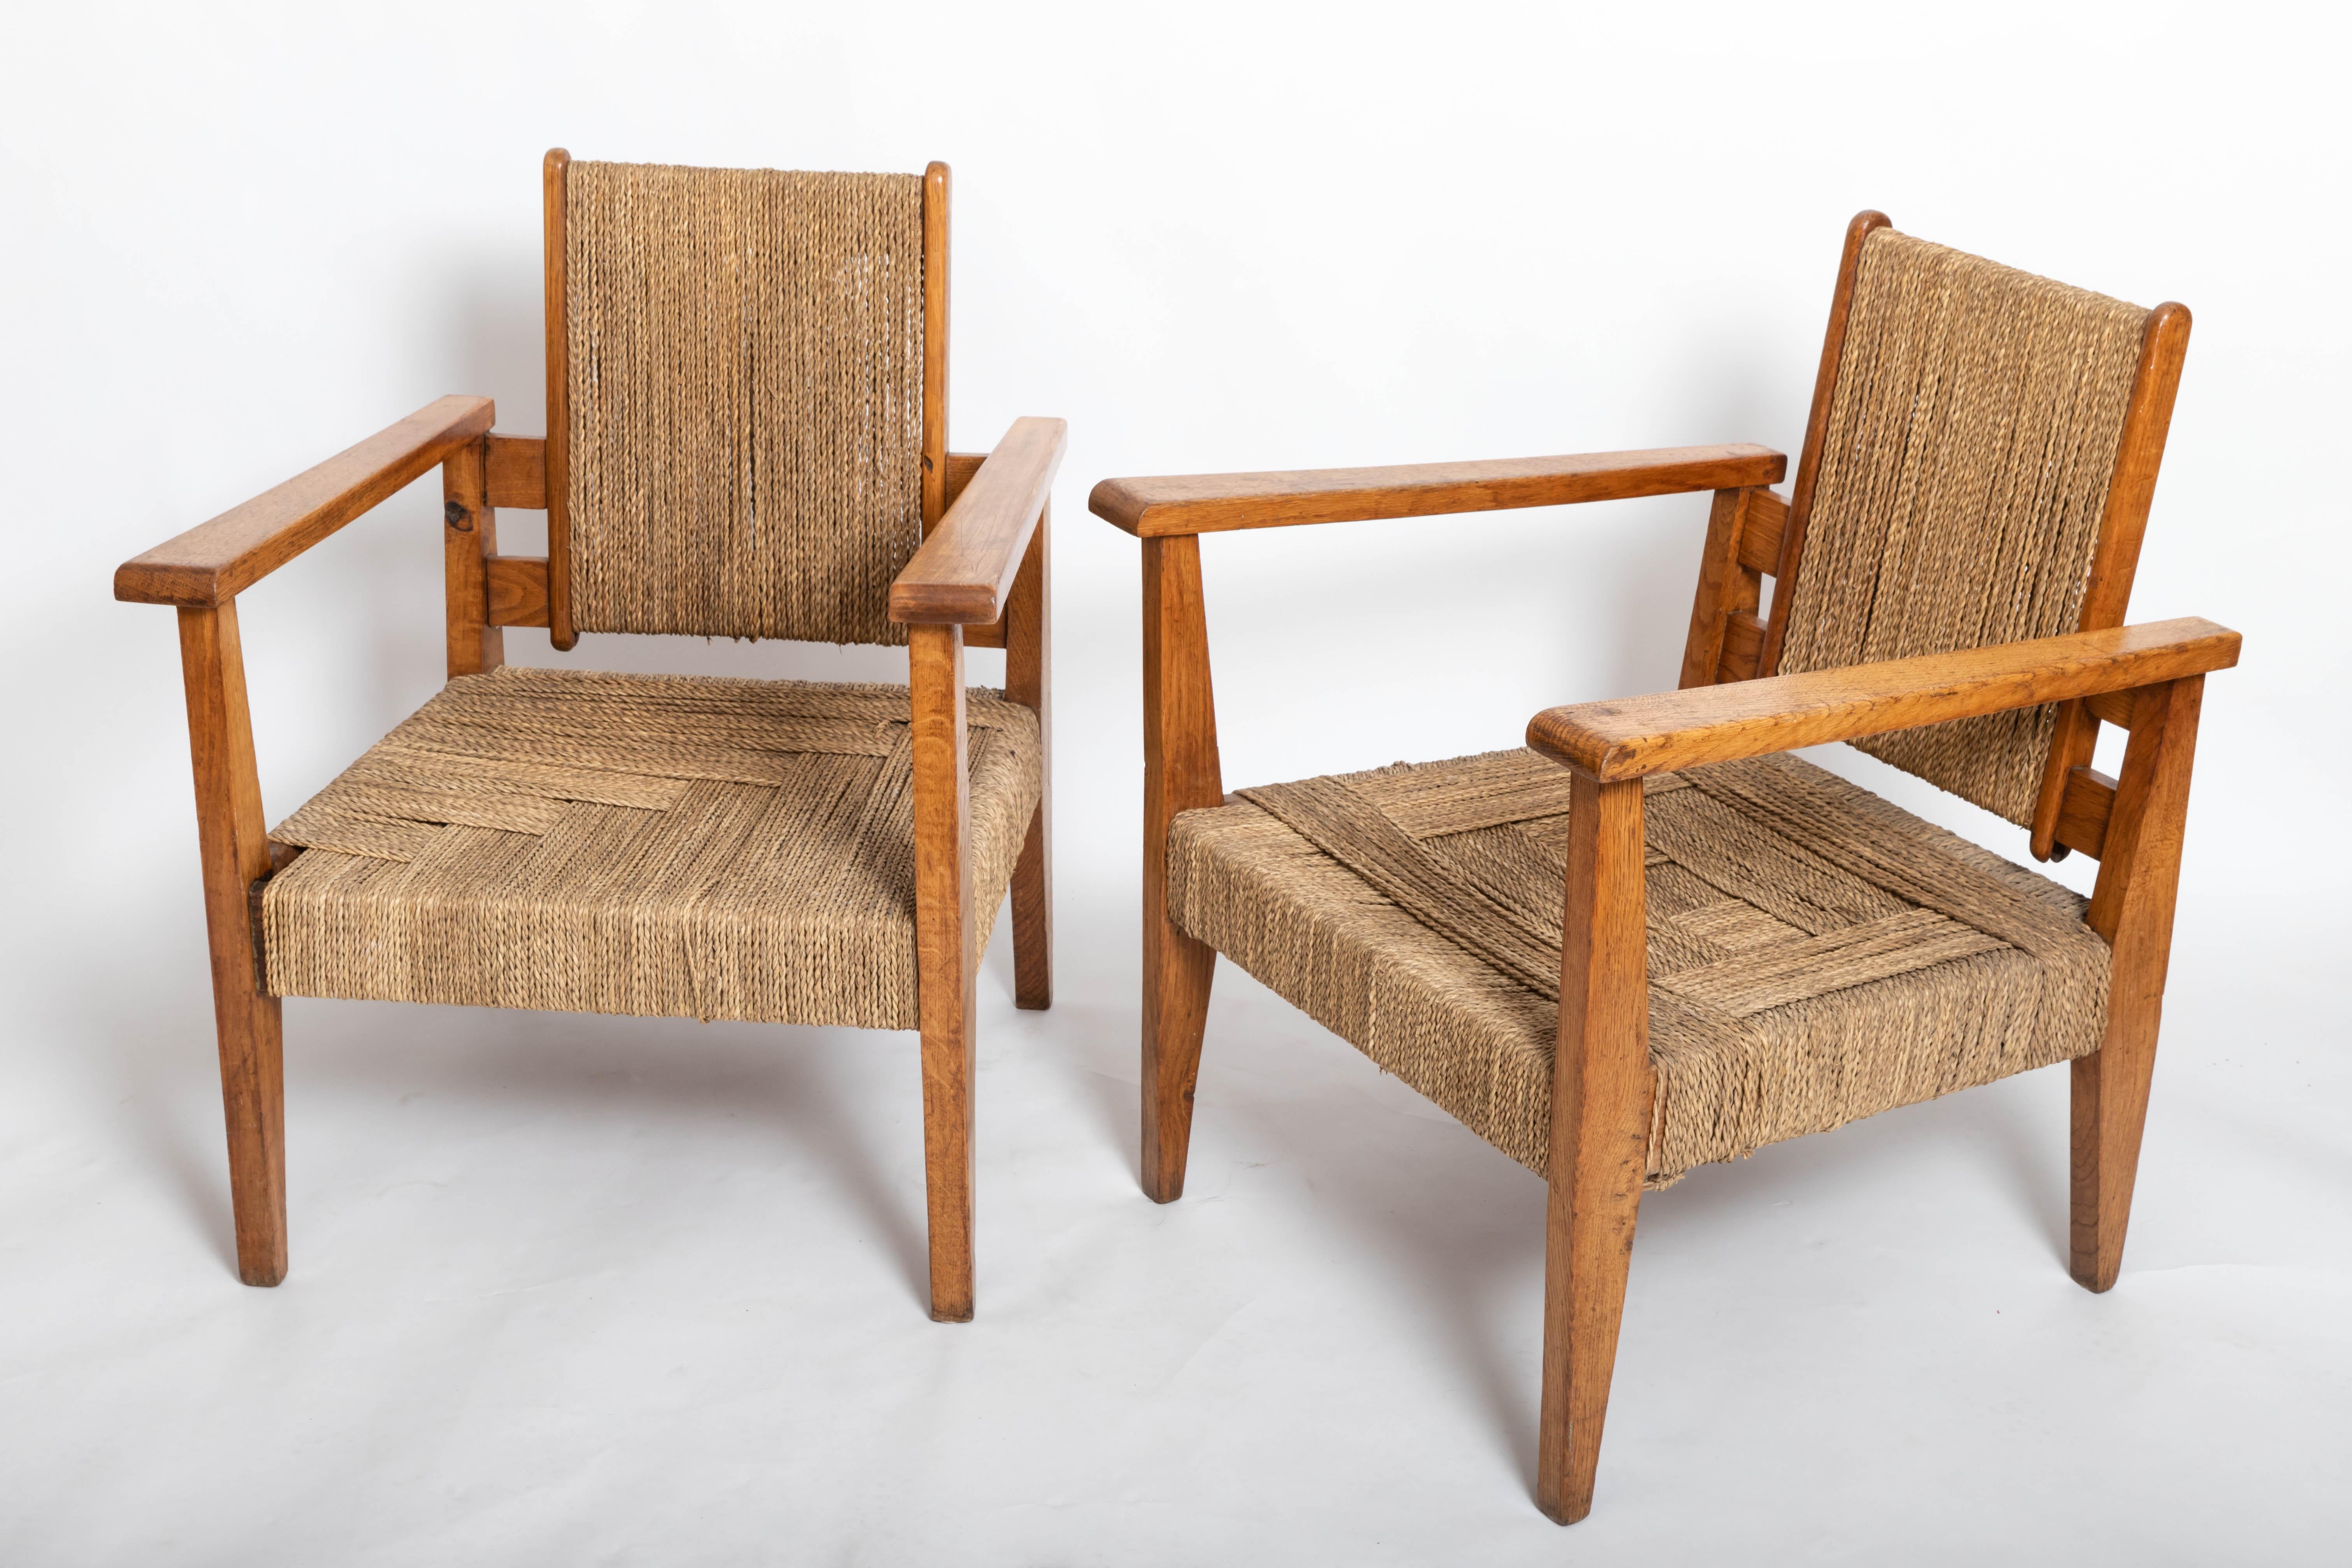 Pair of 1950s sculptural chairs.